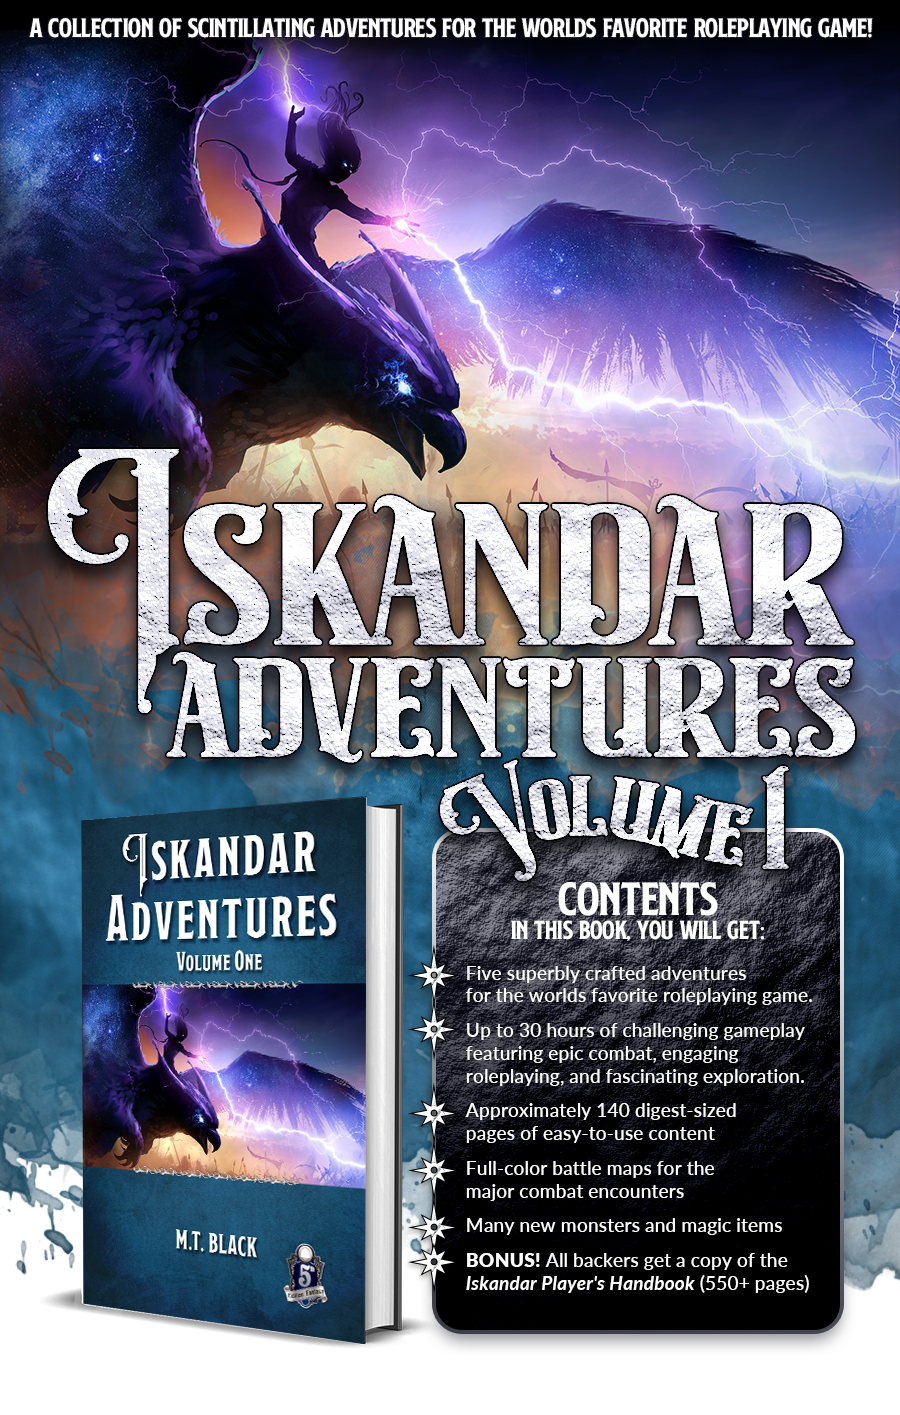 Iskandar Adventures: Volume One. Includes five superbly crafted adventures, up to 30 hours of gameplay, approximately 140 digest-sized pages of content. All backers get a copy of the Iskandar Player's Handbook.